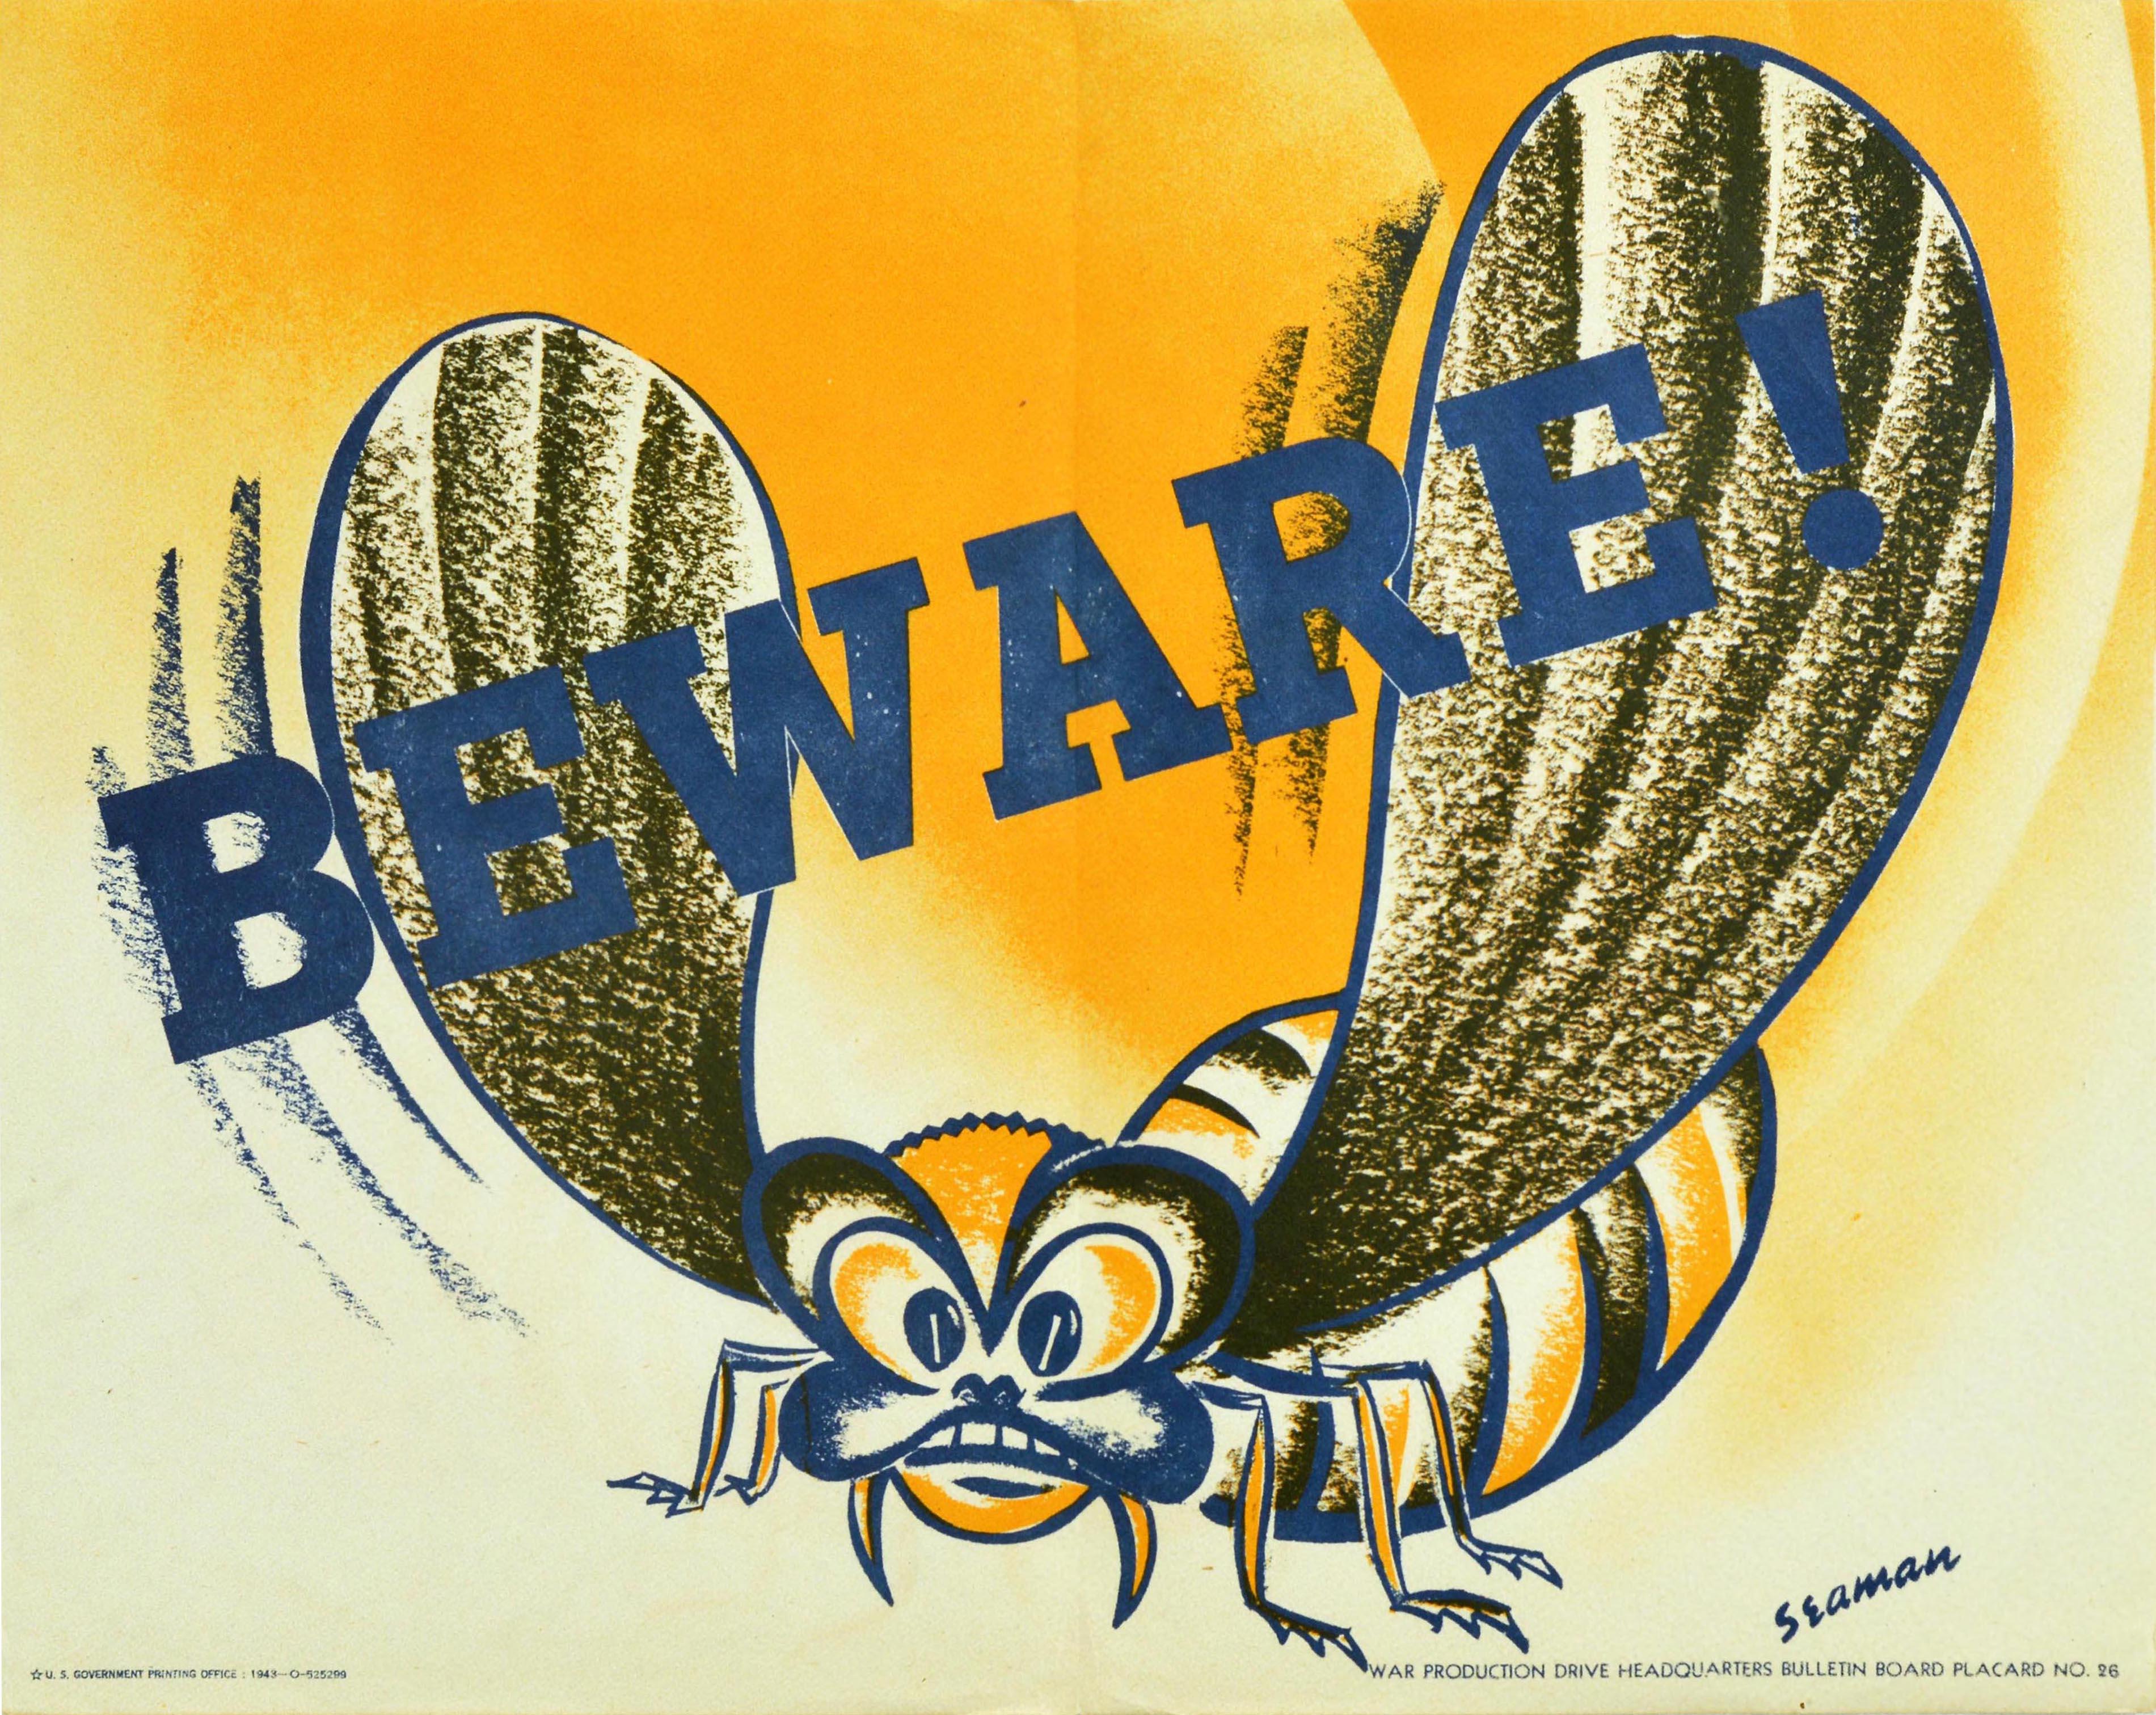 Original vintage World War Two propaganda poster issued by the War Production Drive Headquarters as a warning featuring a dramatic design depicting a large angry looking flying insect - bee / wasp / mosquito - with black and yellow stripes outlined